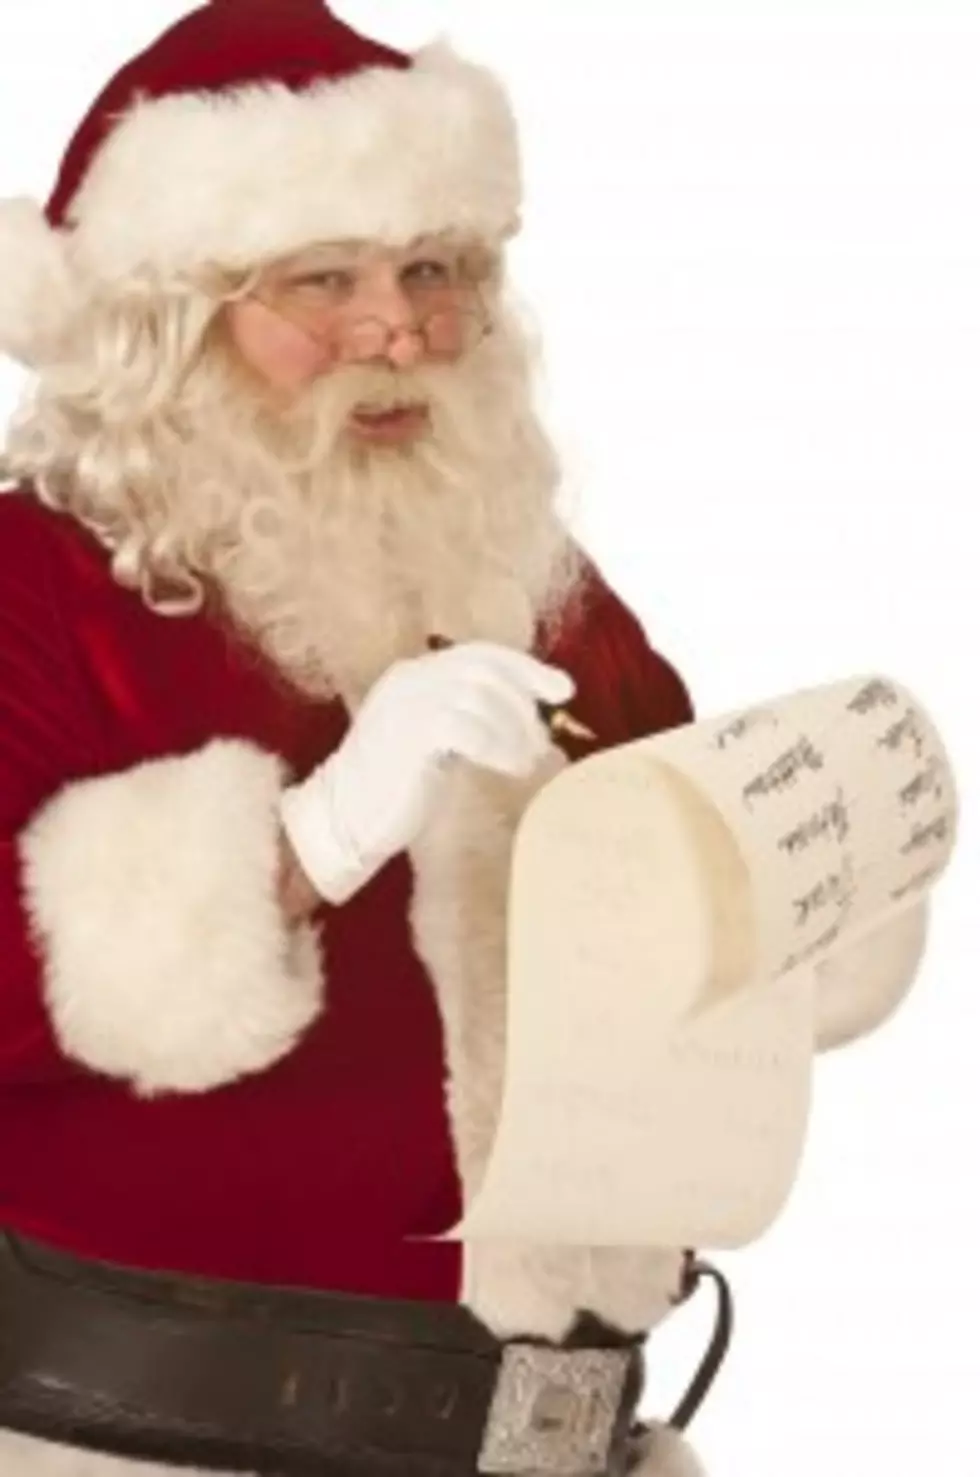 A Mall Santa Is Giving Kids a Lie Detector Test to Find Out If They&#8217;re Naughty or Nice